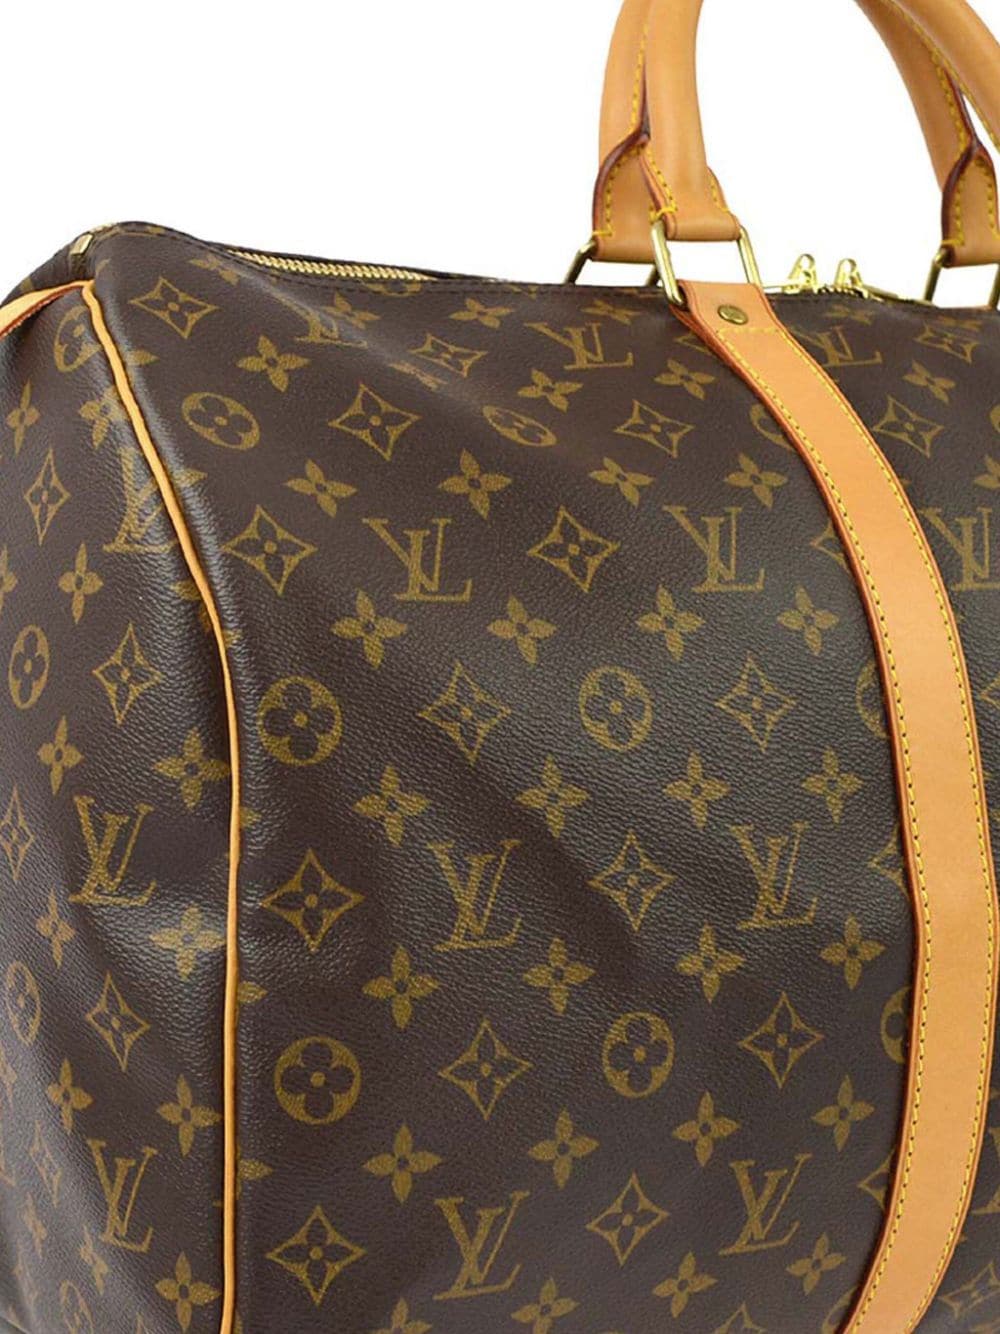 Pre-owned Louis Vuitton 2004 Keepall 50 Travel Bag In Brown